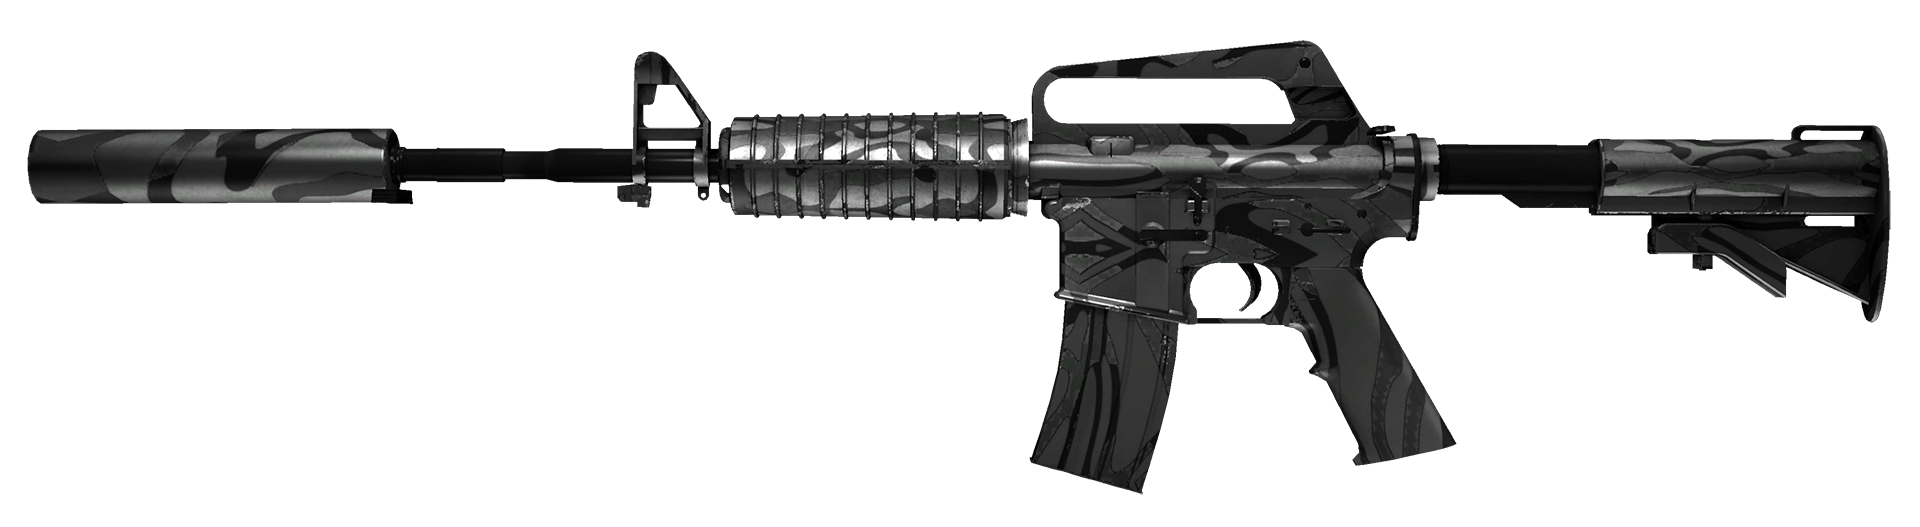 M4a1 s cs go skins betting he will be in a better place